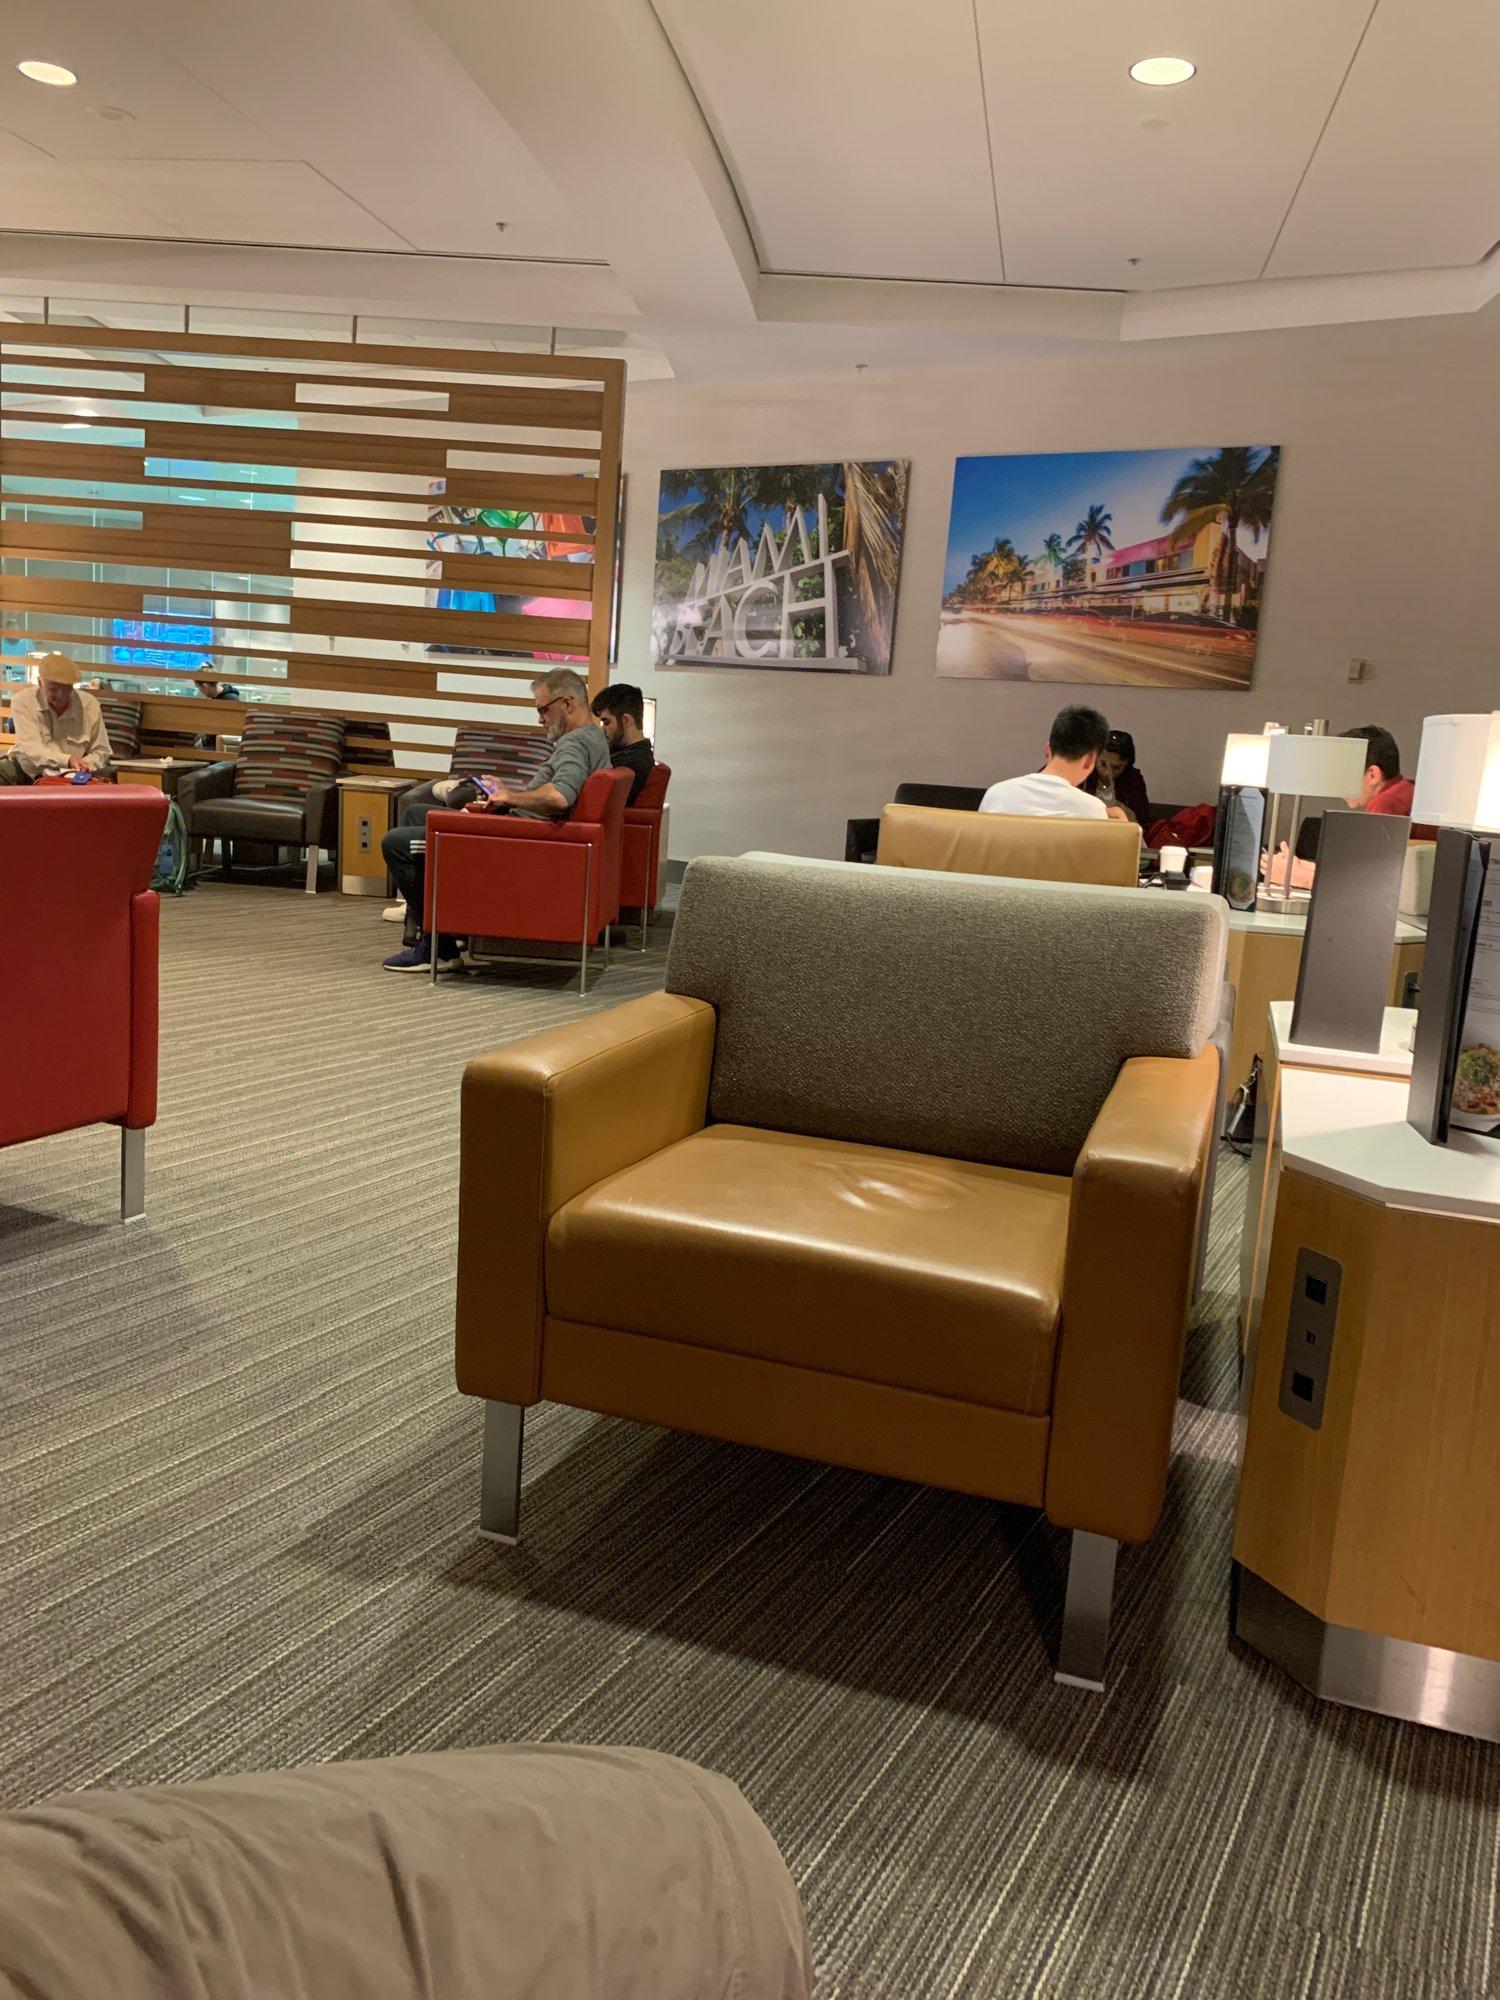 American Airlines Admirals Club (Gate D30) image 6 of 7